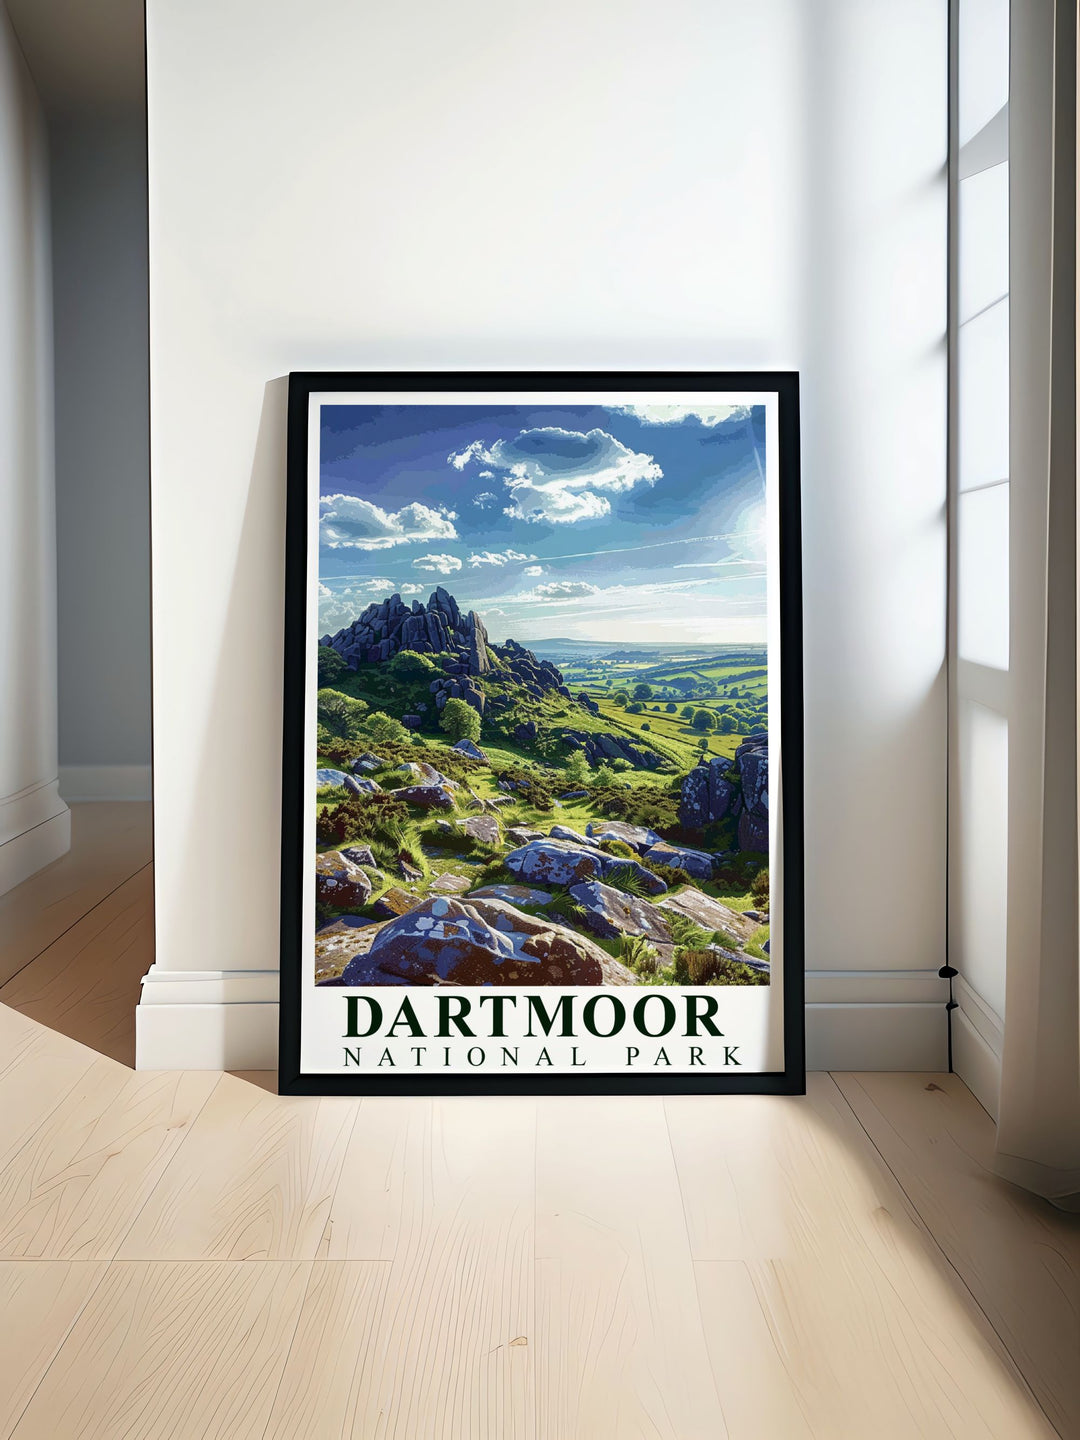 Home decor print illustrating the rugged landscapes of Dartmoor, highlighting the natural beauty and historical significance of this iconic national park in Devon, England.